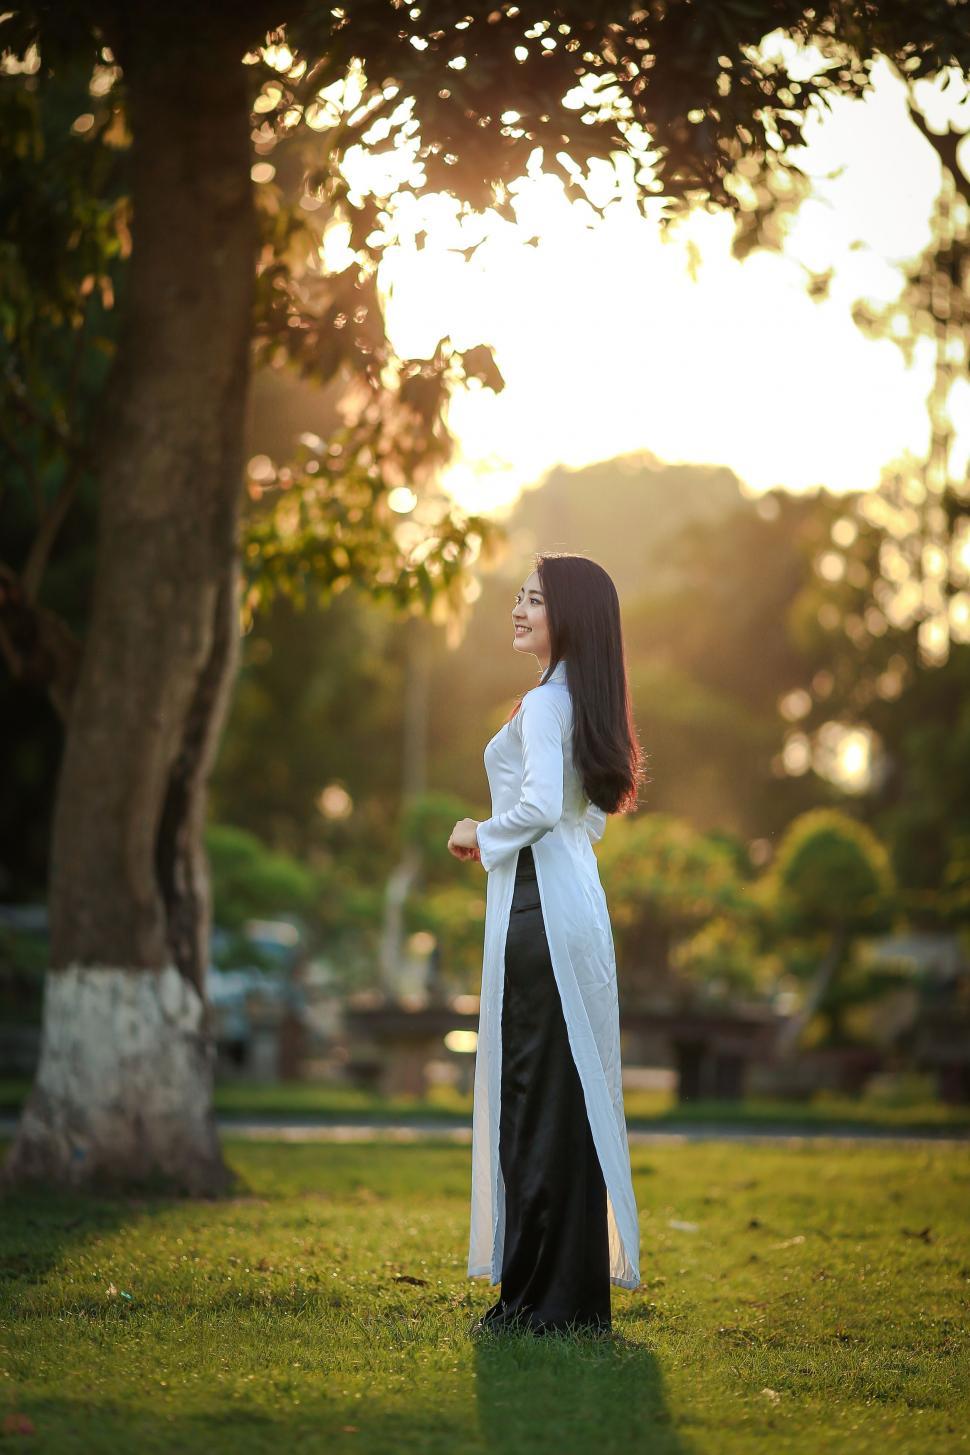 Free Image of Vietnamese Woman Standing on Green Grass 